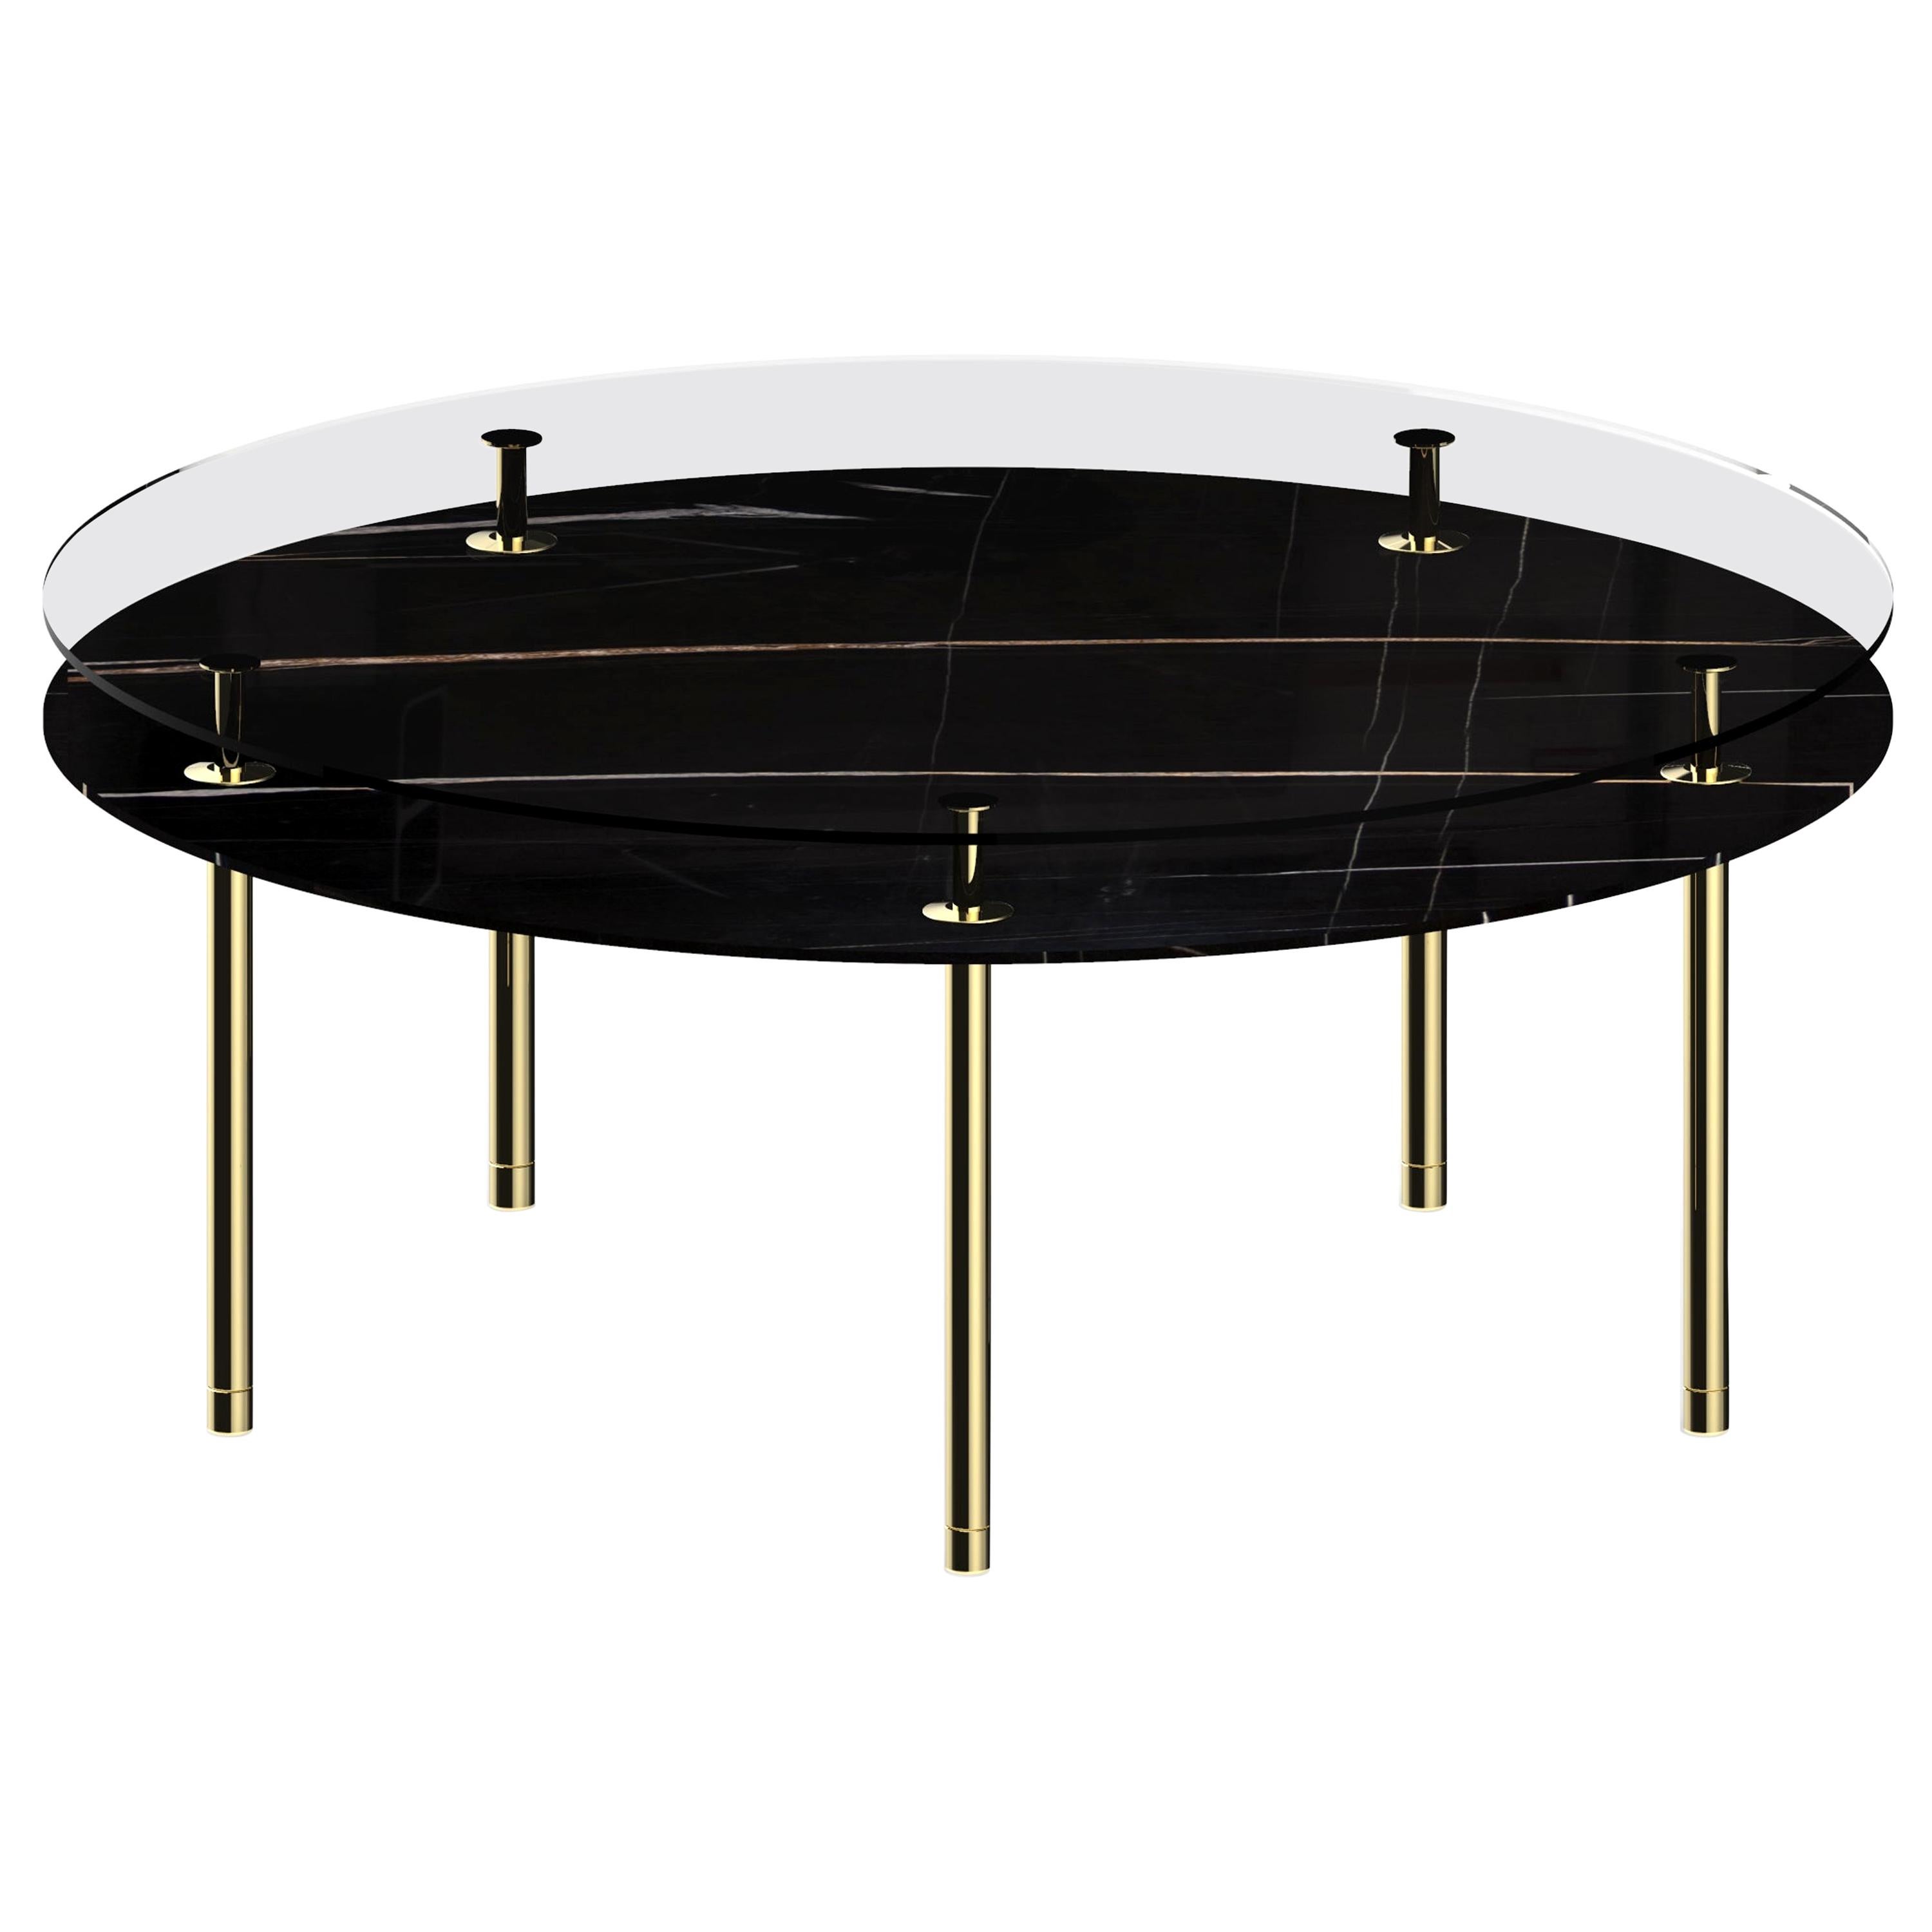 Paolo Rizzatto Dining Room Tables